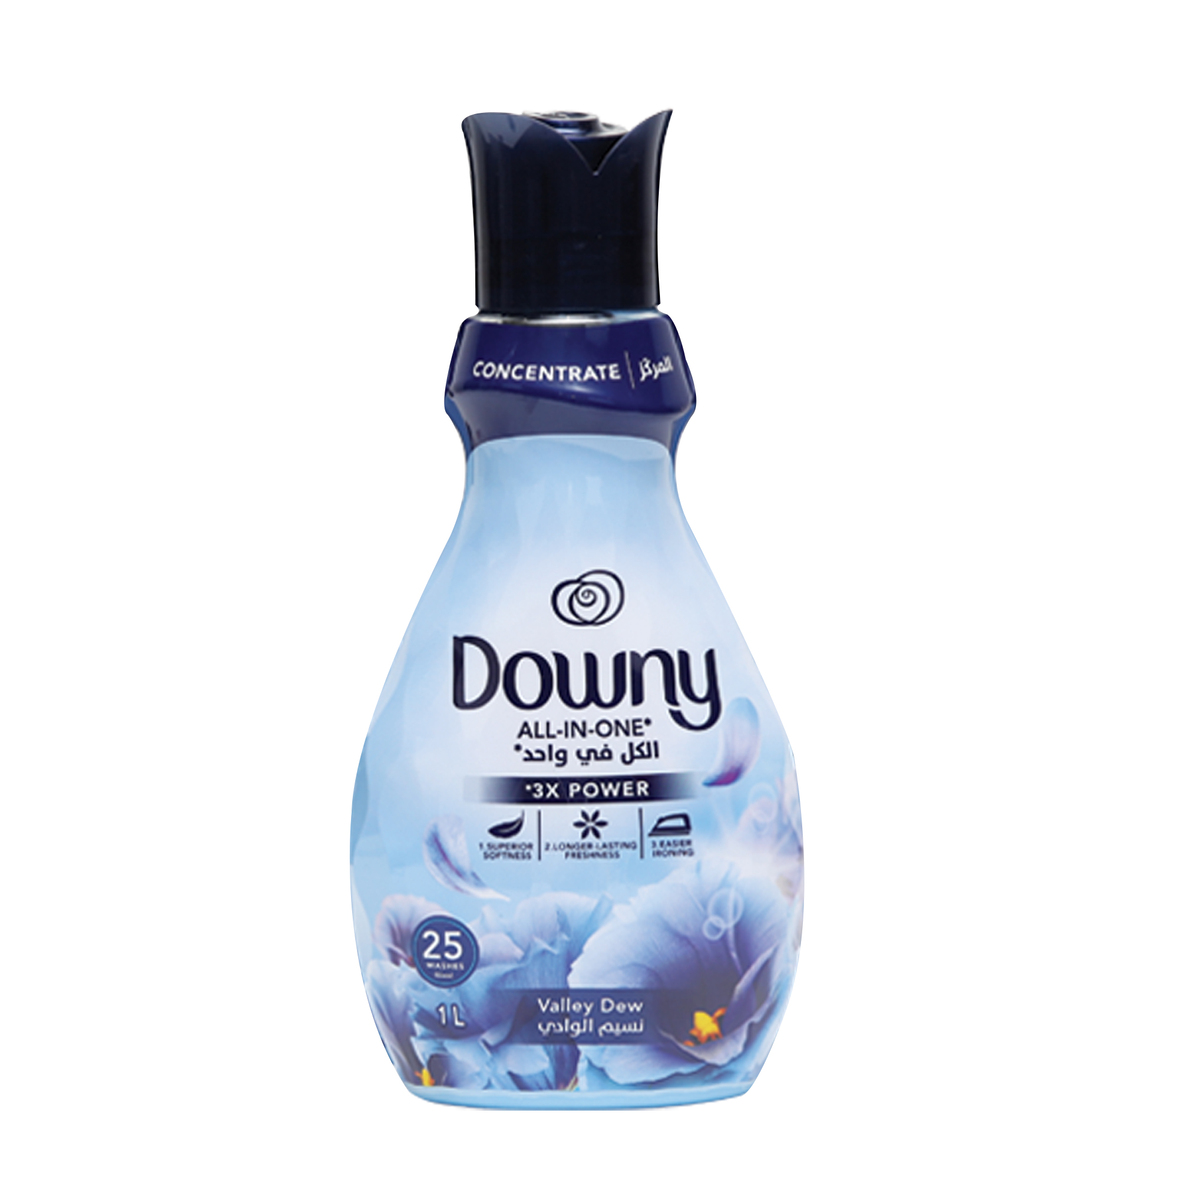 Downy Concentrate All-in-One Power Valley Dew Scent Fabric Softener 3 x 1 Litre